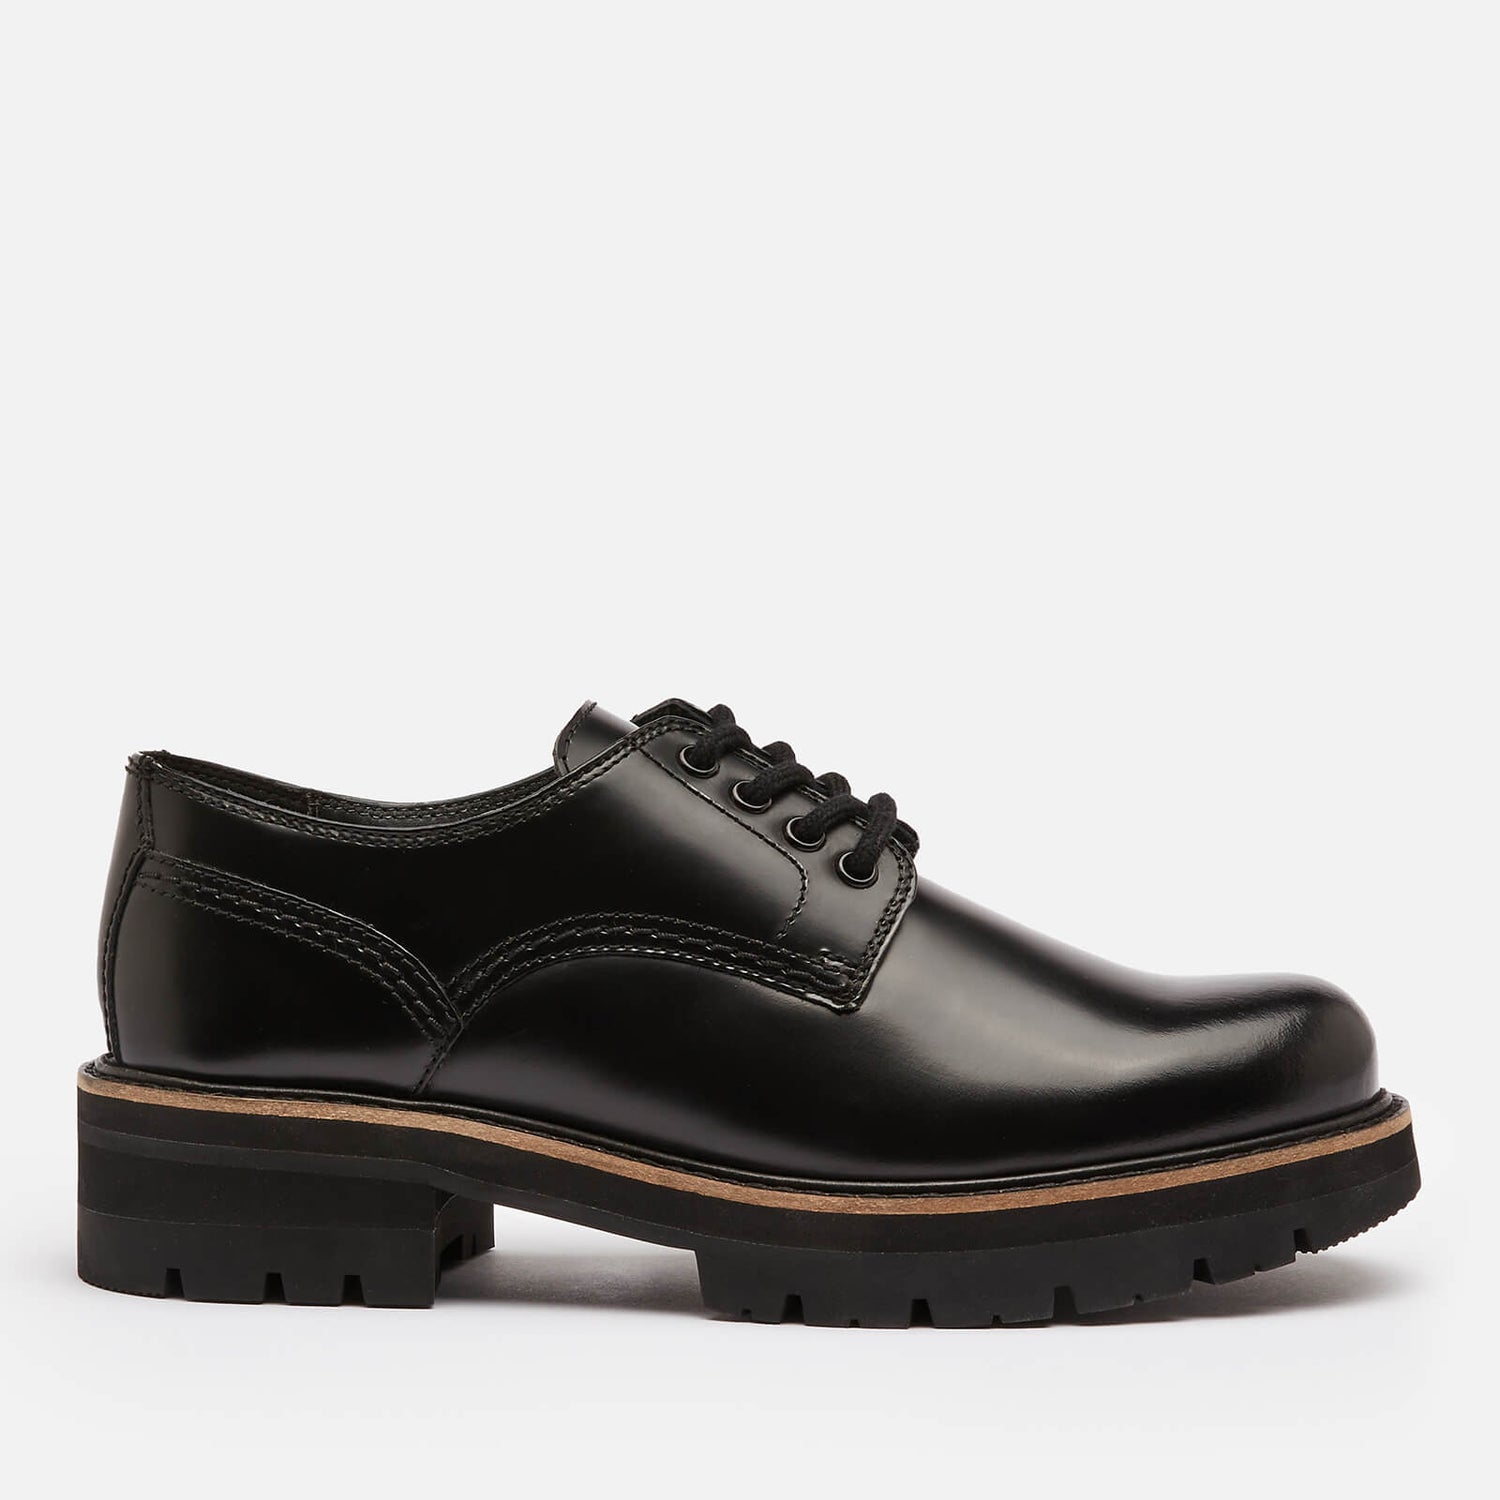 Clarks Women's Orianna Leather Chunky Derby Shoes - Black